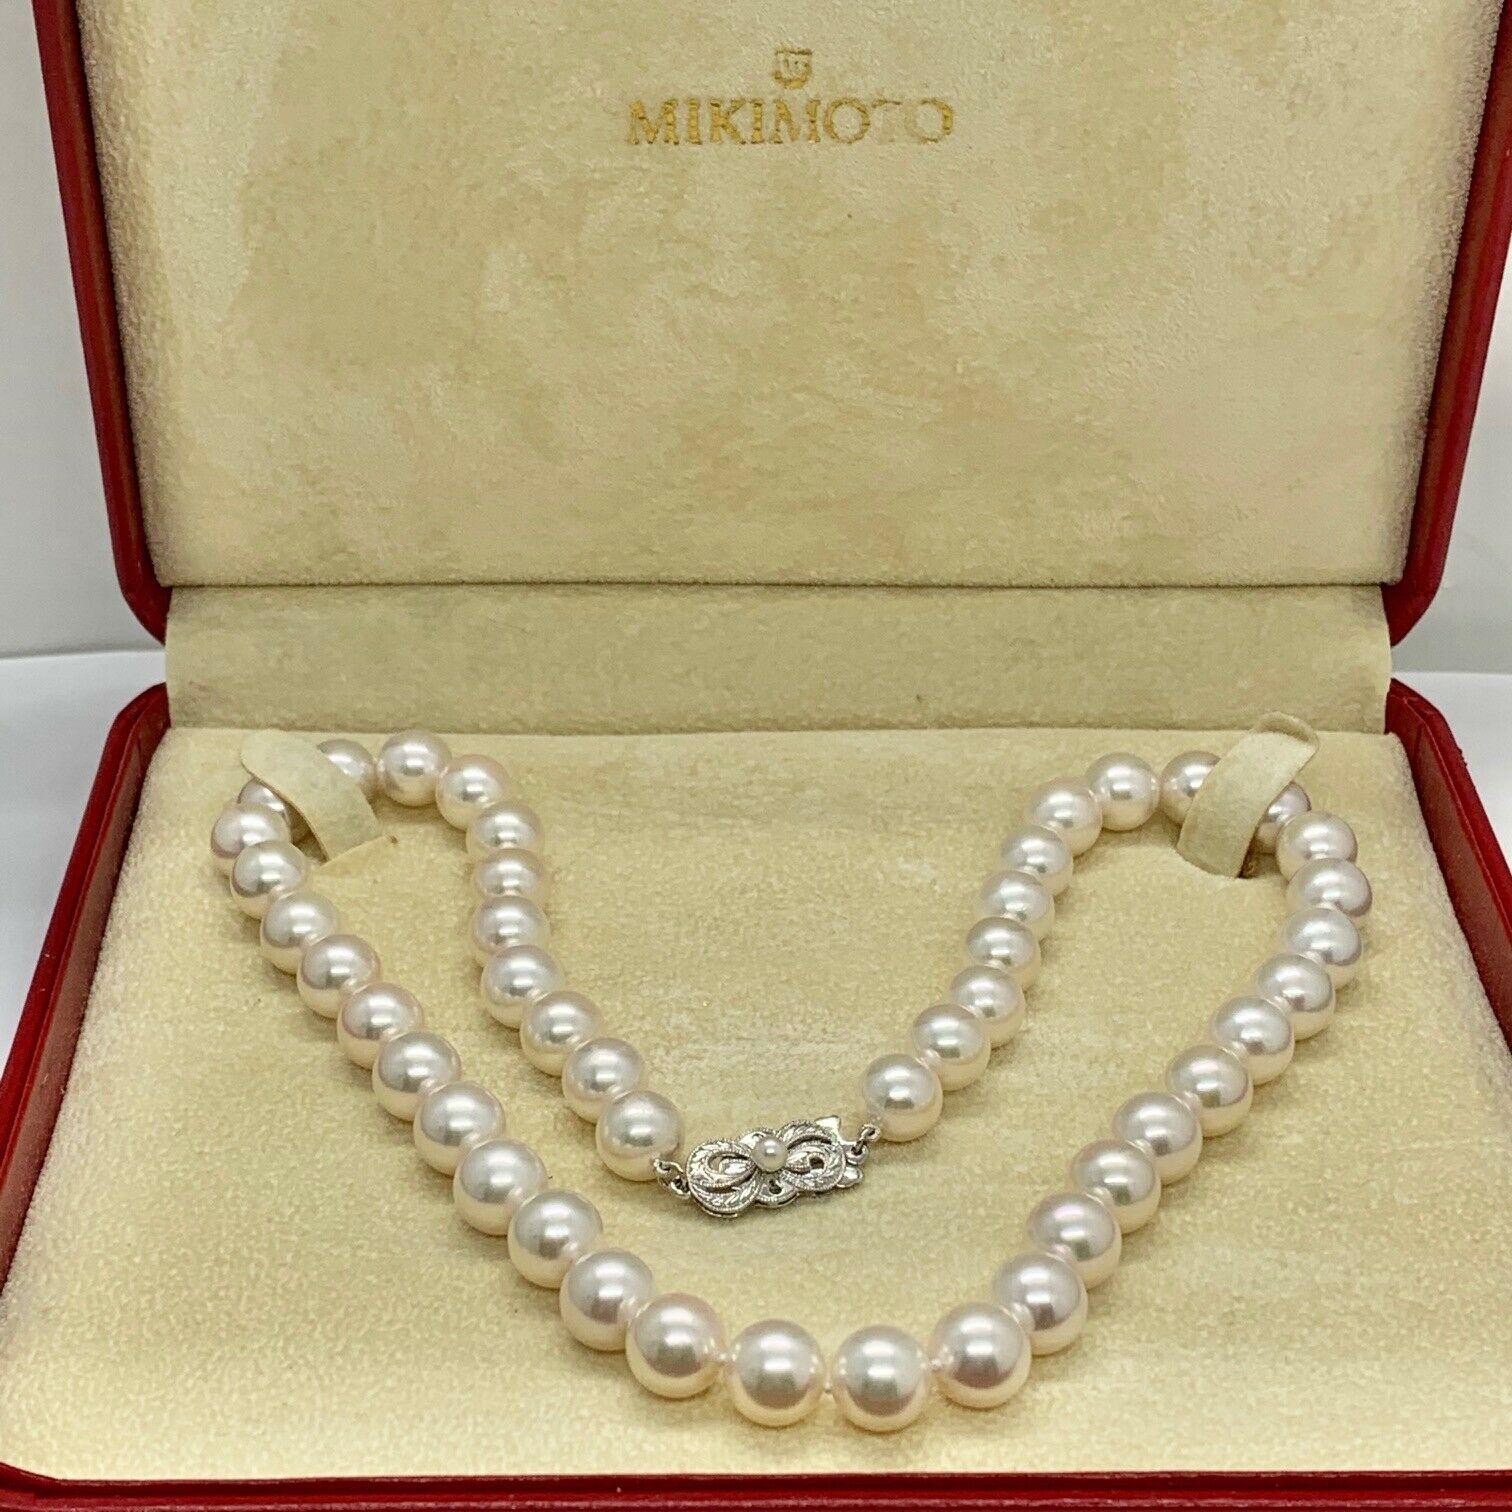 Certified $17,500 Estate Mikimoto 8.50-9.00 MM Lady's Akoya Pearl Necklace.

Nothing says, “I Love ❤️ you” more than Diamonds ???????? and Pearls.

Certified by
Gemological Appraisal Laboratory
Gemological Appraisal Laboratory of America is a proud